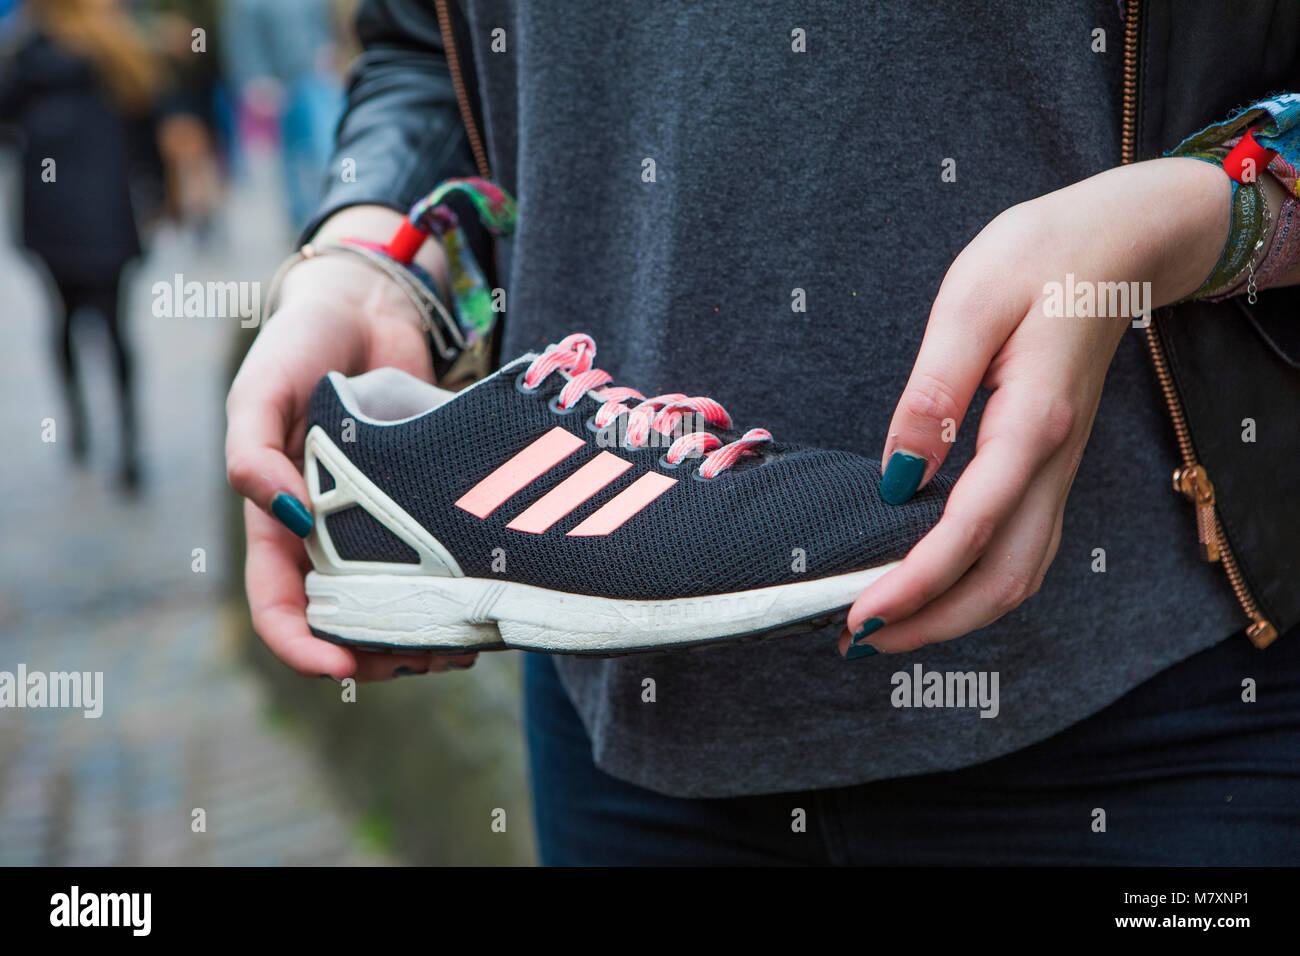 black adidas shoes with blue stripes